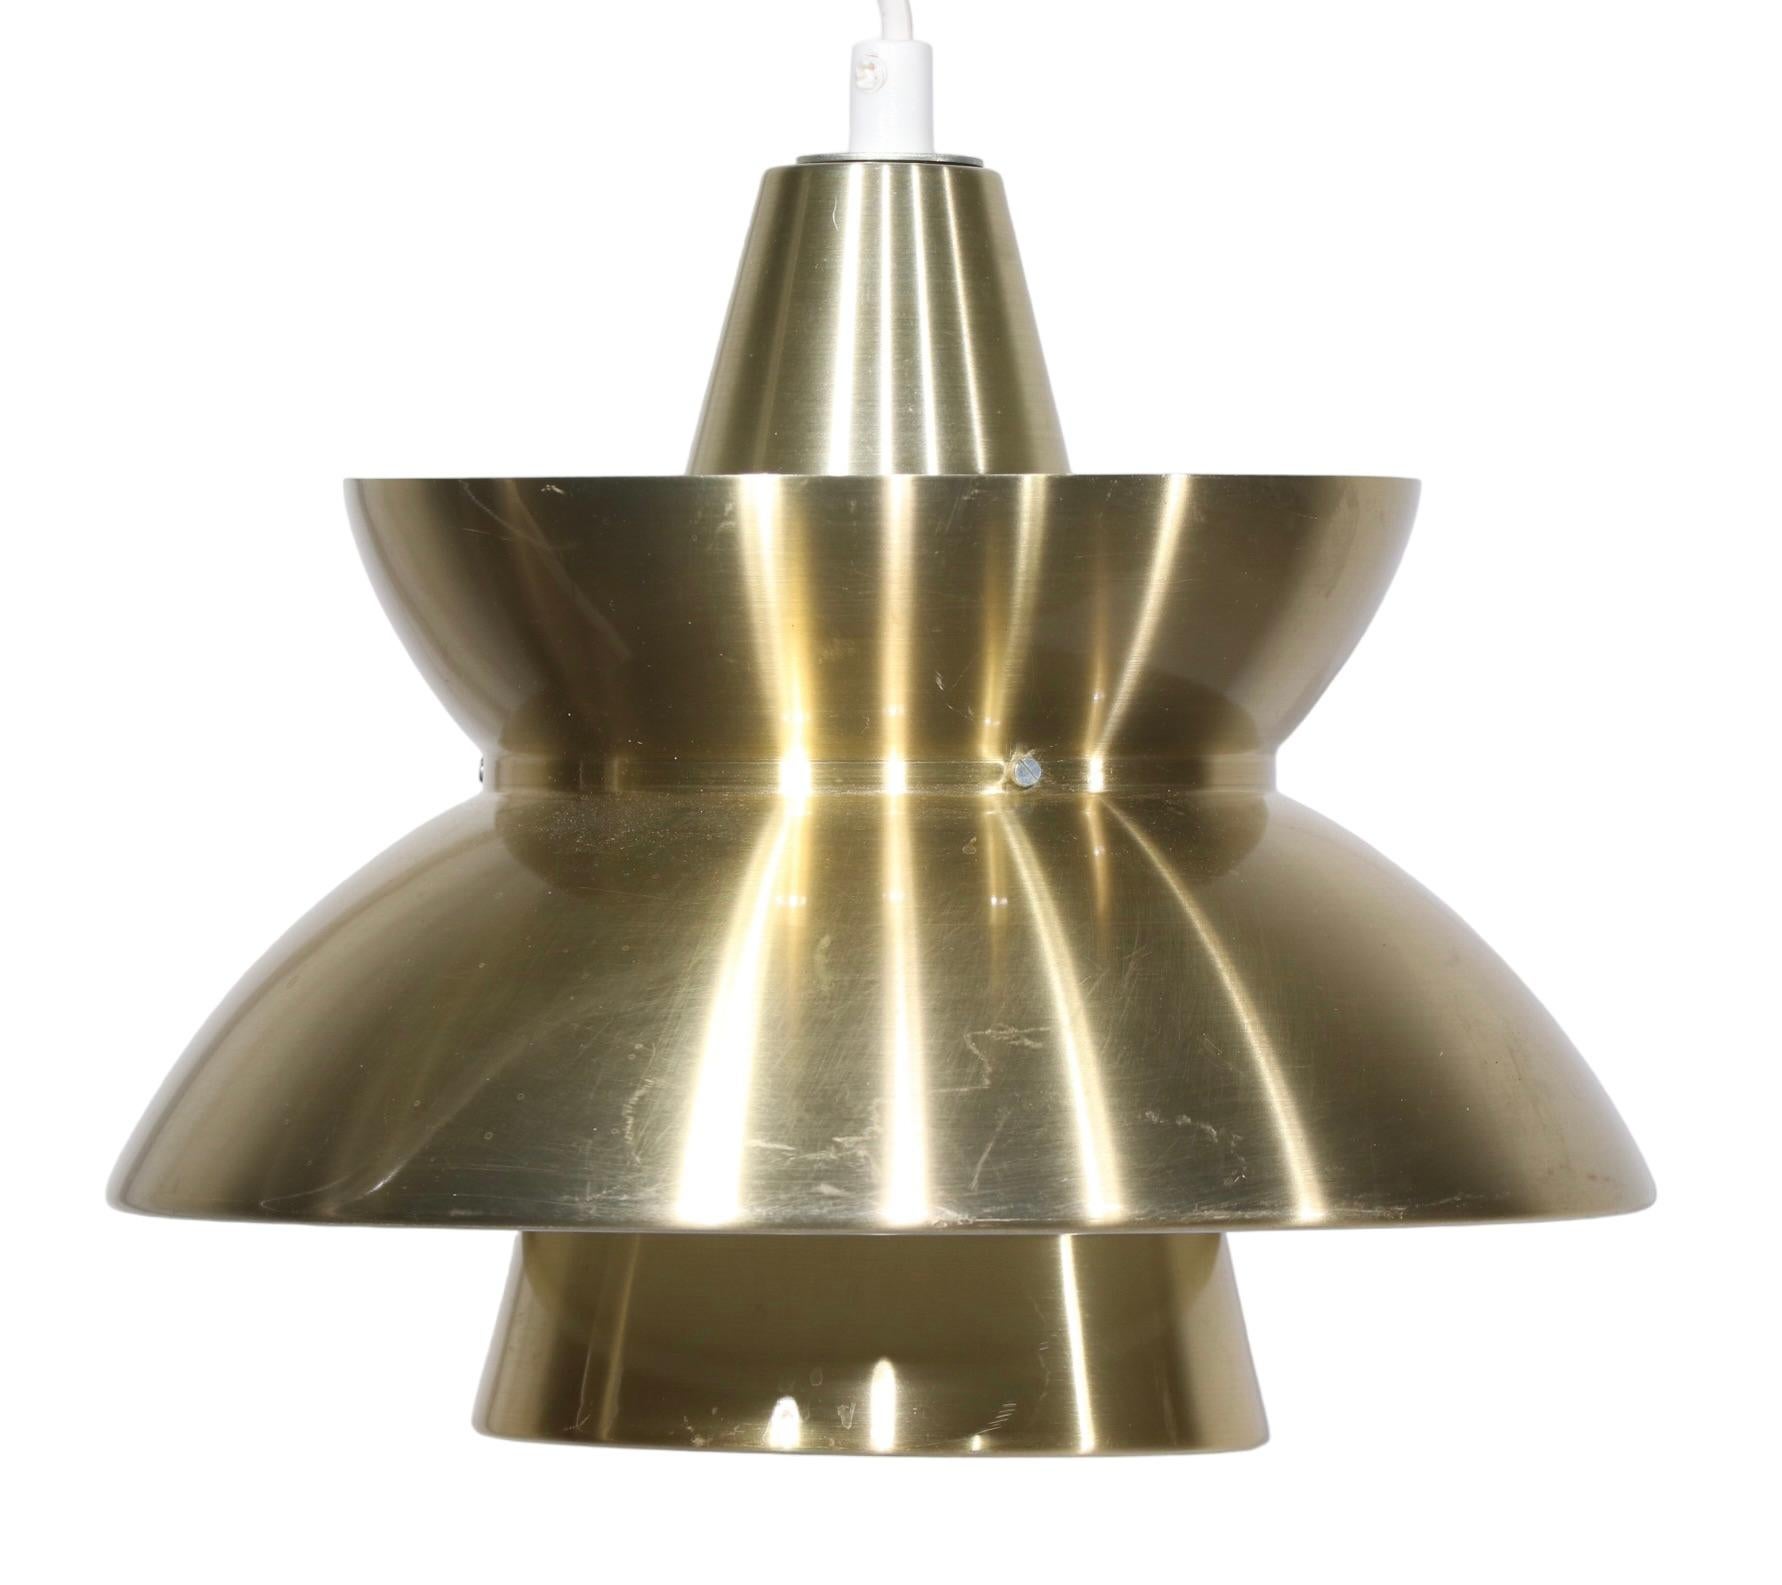 Nice pair of Doo Wop style Jorn Utzon Sovaernspendel  tiered pendant fixtures, made in Denmark c. 1960's. The chandeliers have light weight aluminum bodies, which are in original anodized brass finish - showing light cosmetic wear, normal and